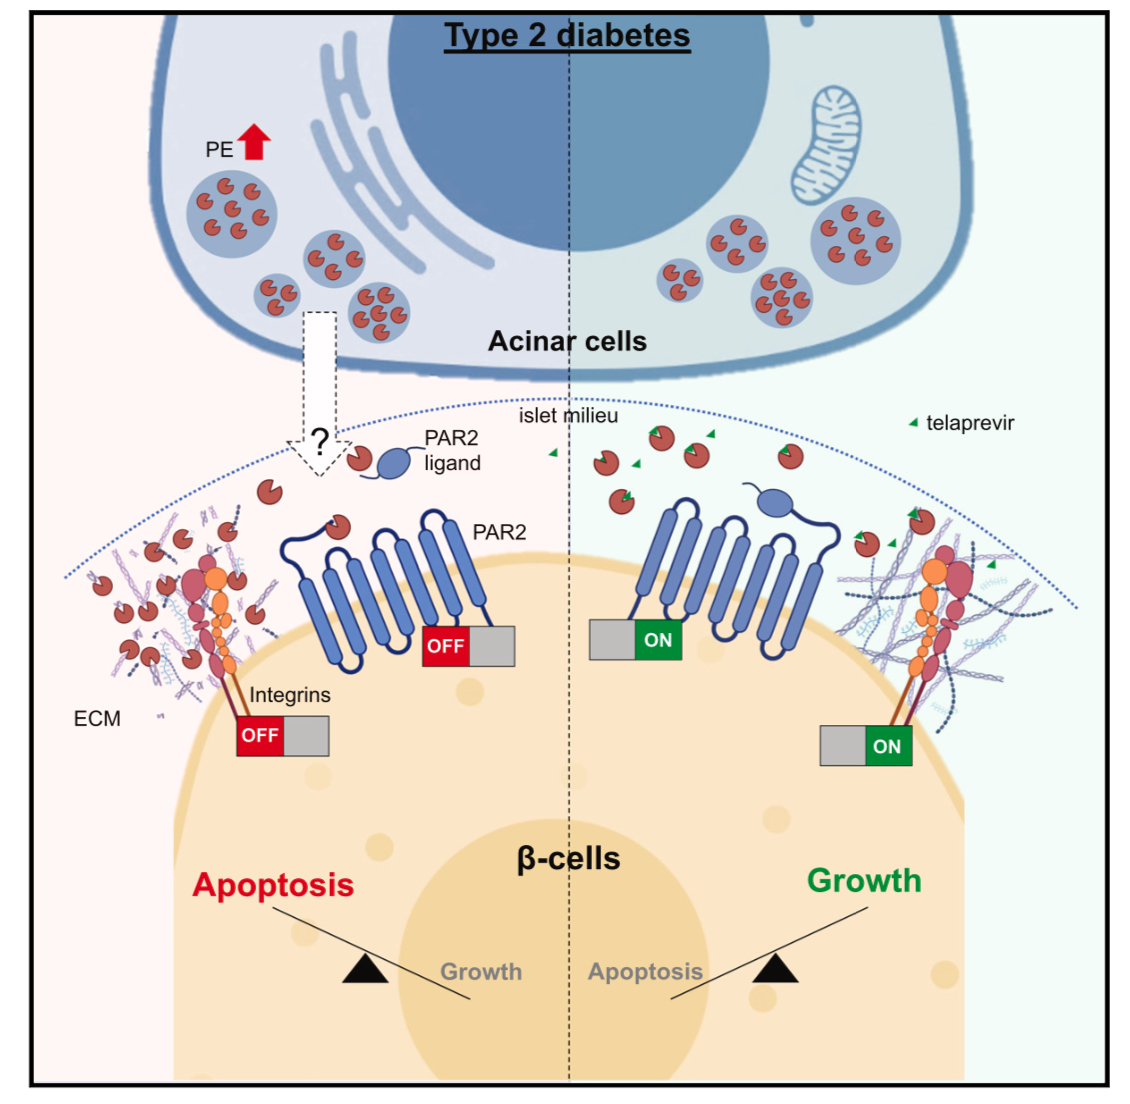 I am extremely delighted to share our recently published work describing the new role of #pancreaticelastase in regulating #betacell homeostasis in the context of #endocrineexocrinecrosstalk in diabetes.

sciencedirect.com/science/articl…